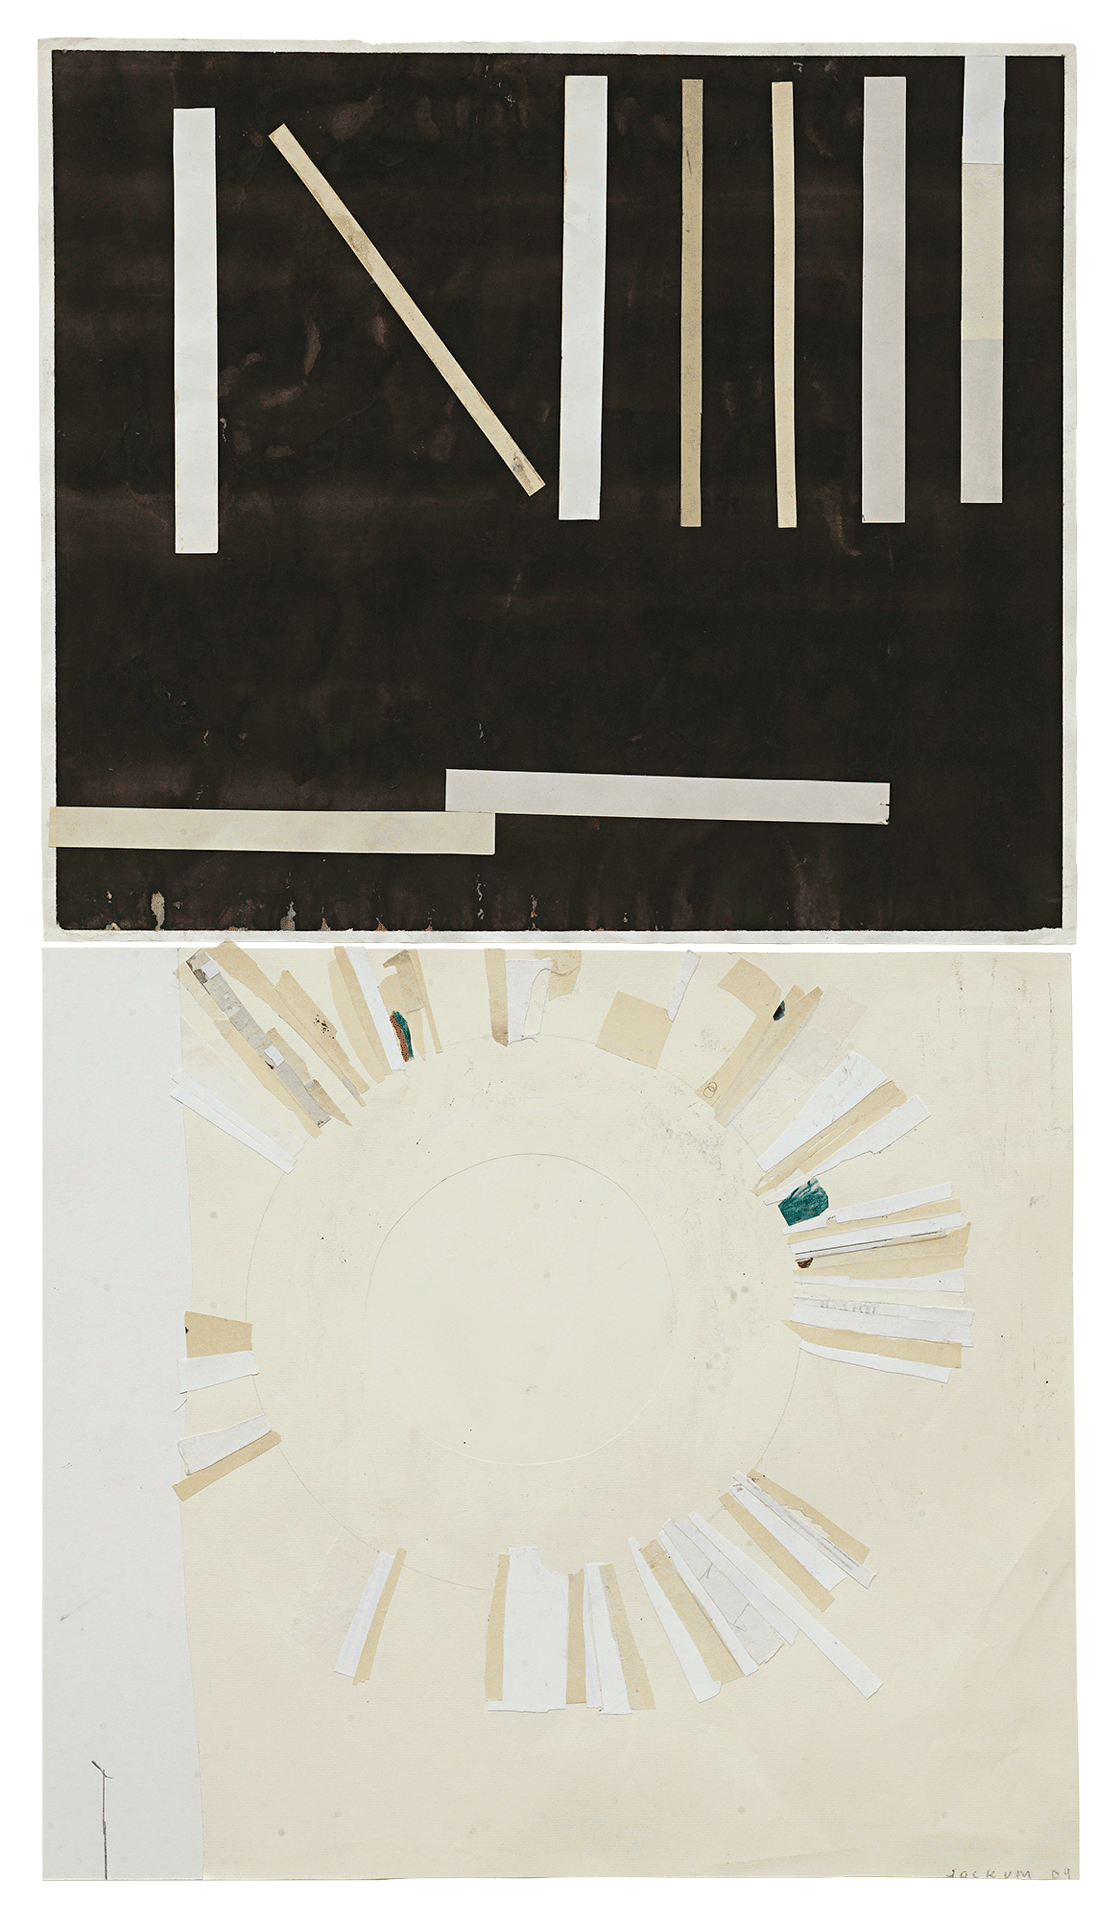 An untitled work on paper by Jockum Nordstr√∂m, dated 2003.